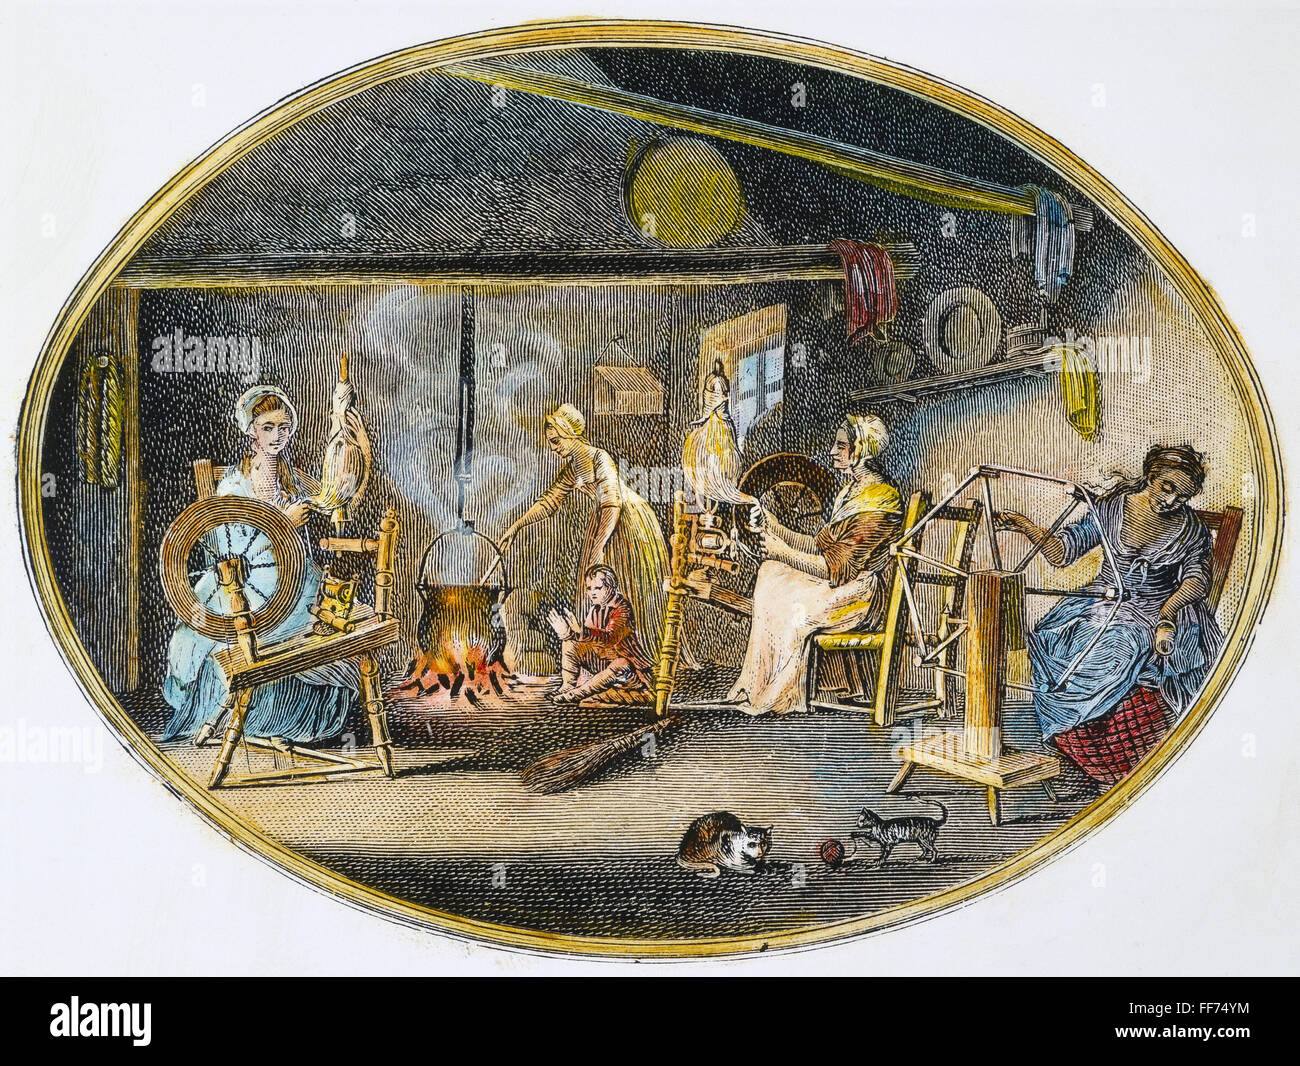 LINEN MANUFACTURE, 1783. /n'Spinning - reeling with the clock-reel - boiling yarn.' Engraving illustrating the Irish linen manufacture in County Down, Ireland. Stock Photo